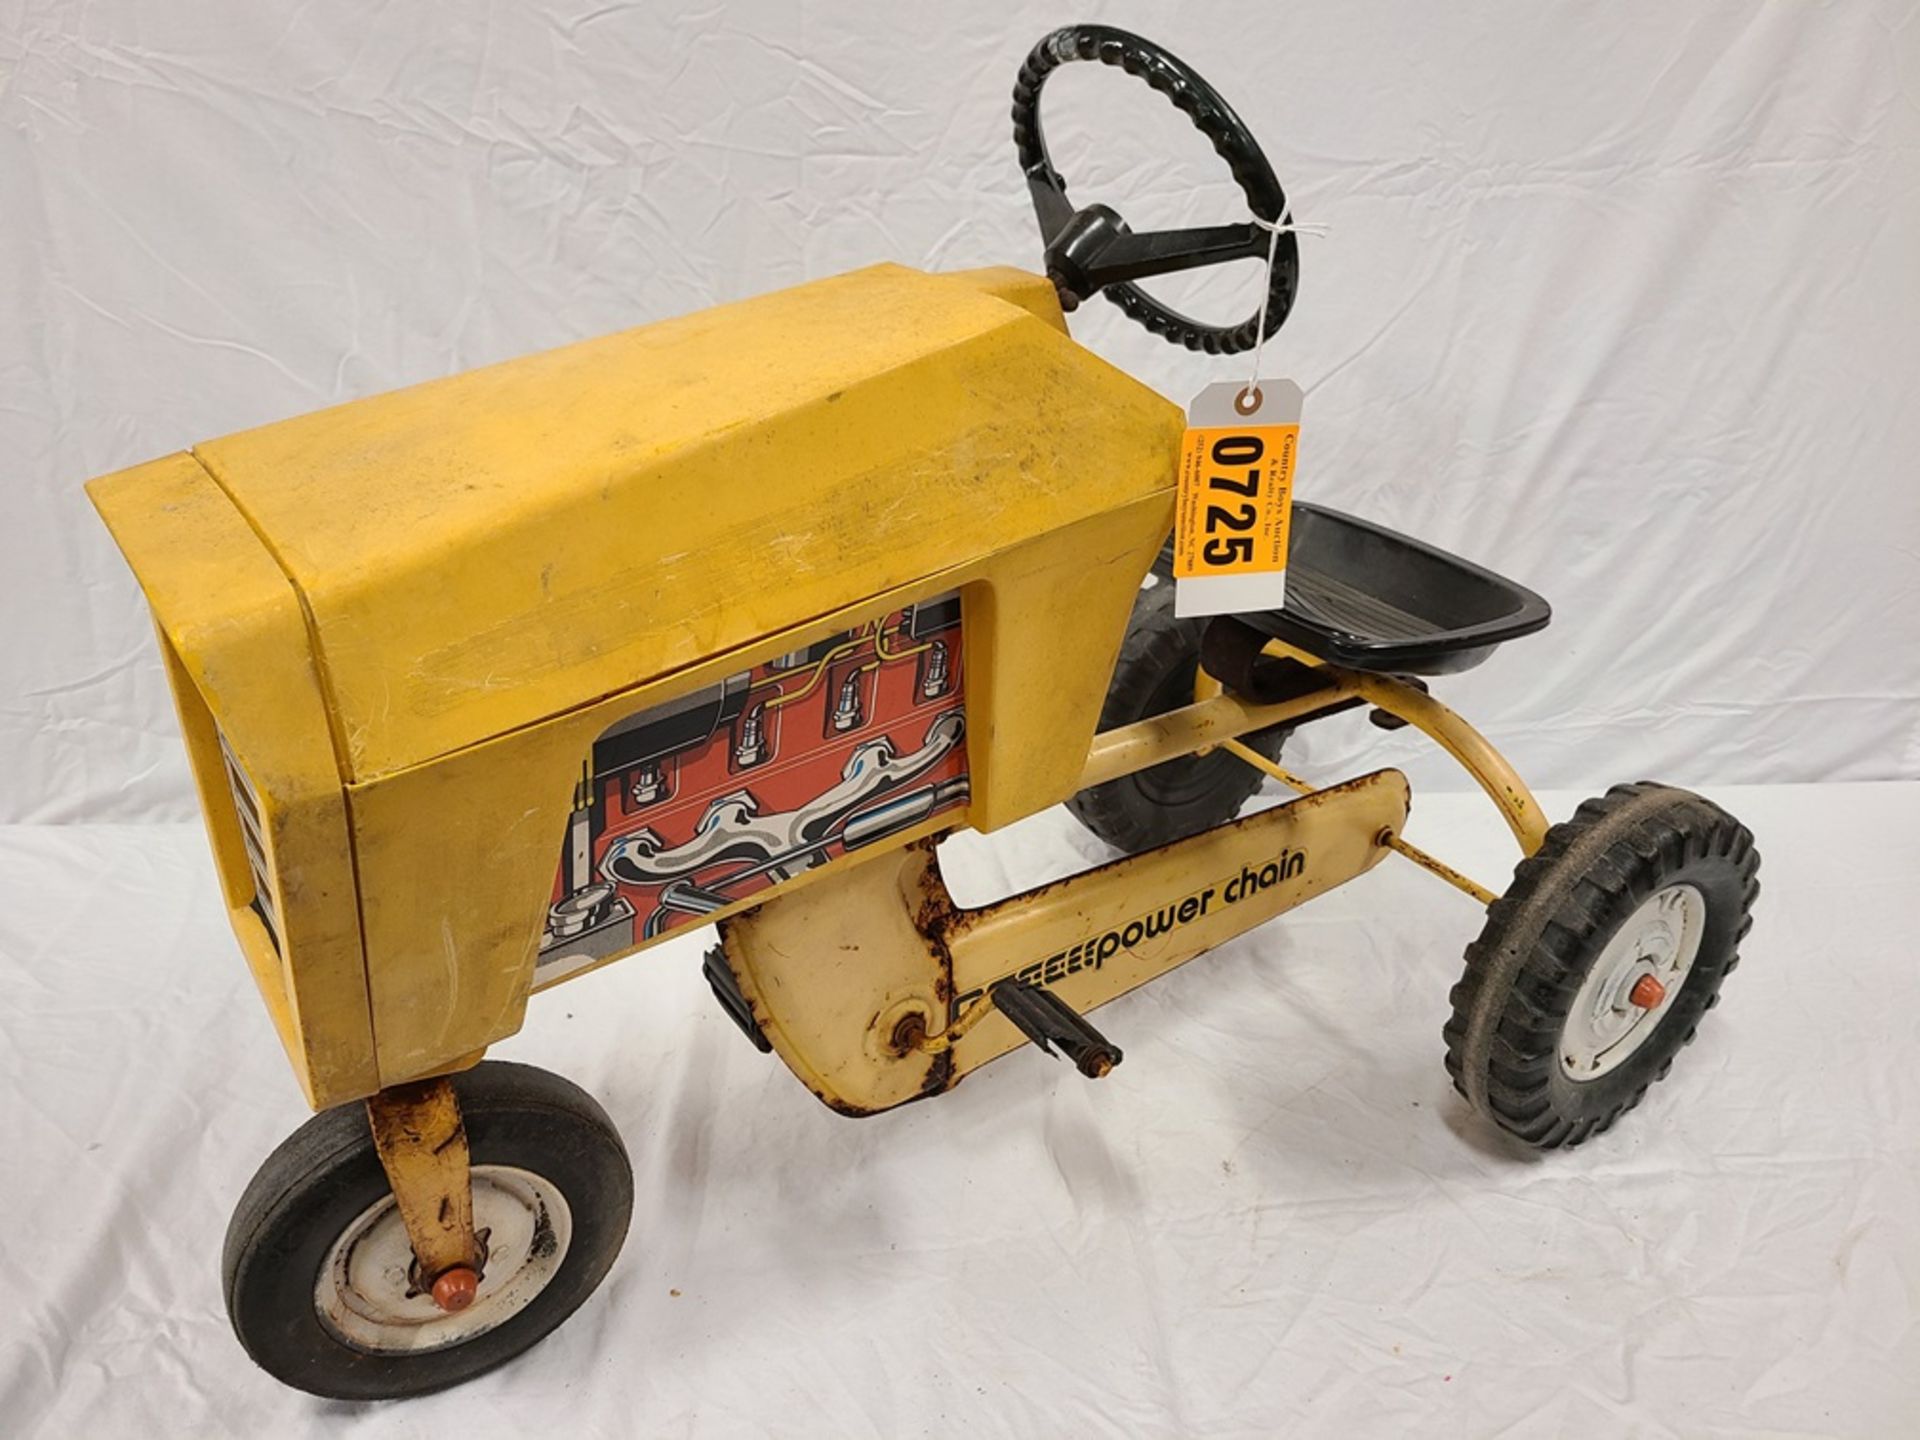 yellow "Tractor" tricycle pedal tractor (metal/plastic)